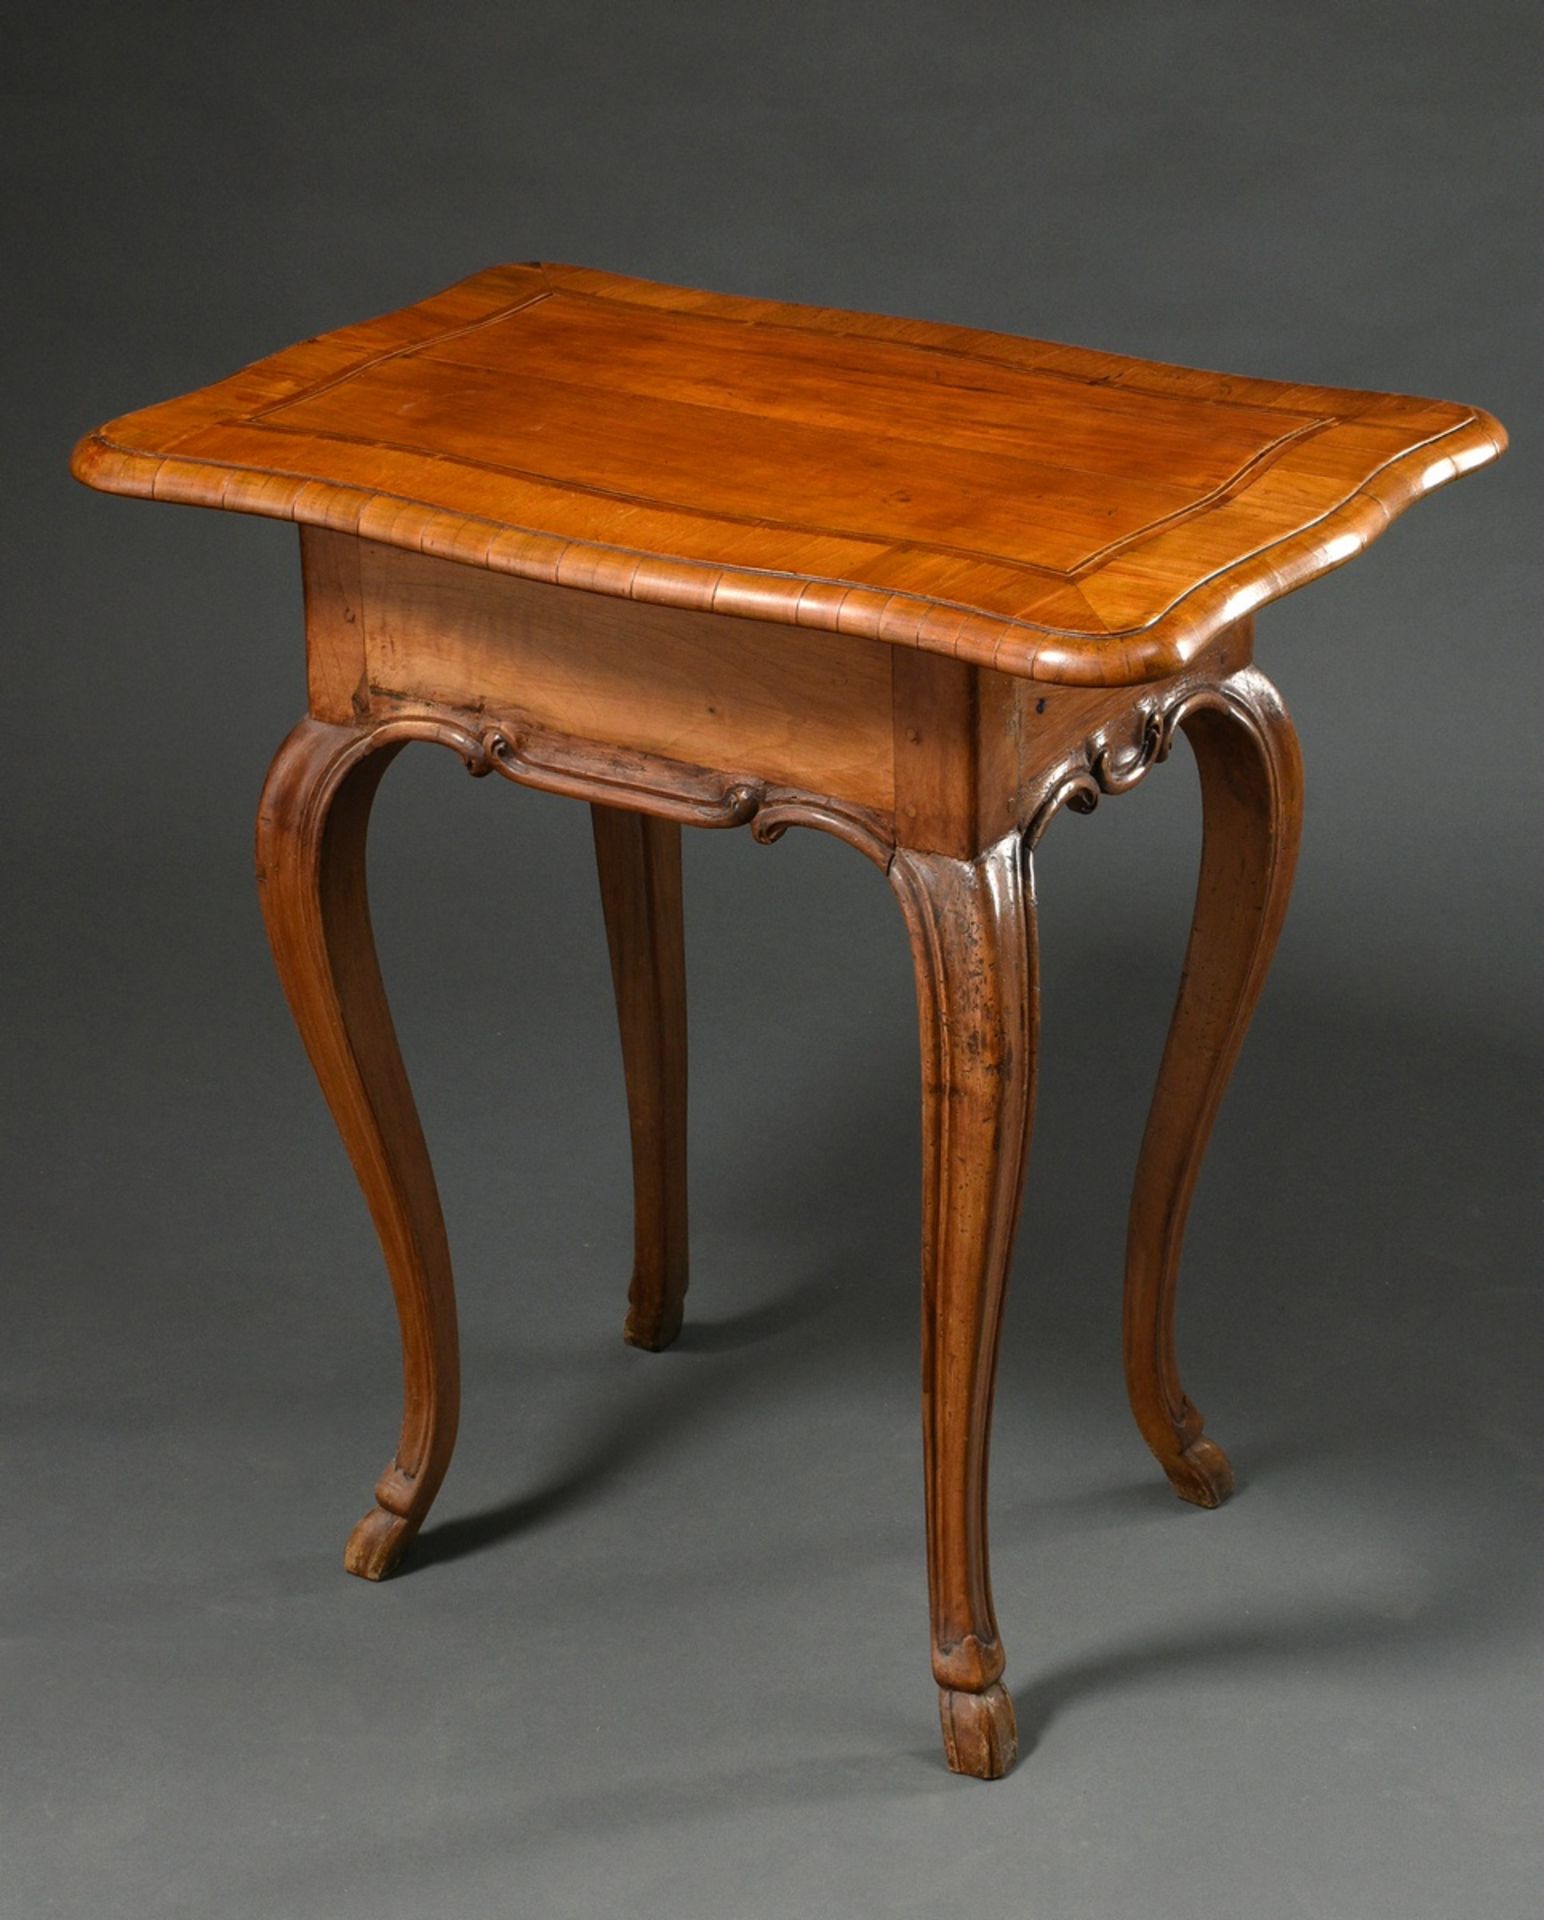 Small baroque side table with curved top and small drawer in the frame over curved legs, walnut and - Image 5 of 5